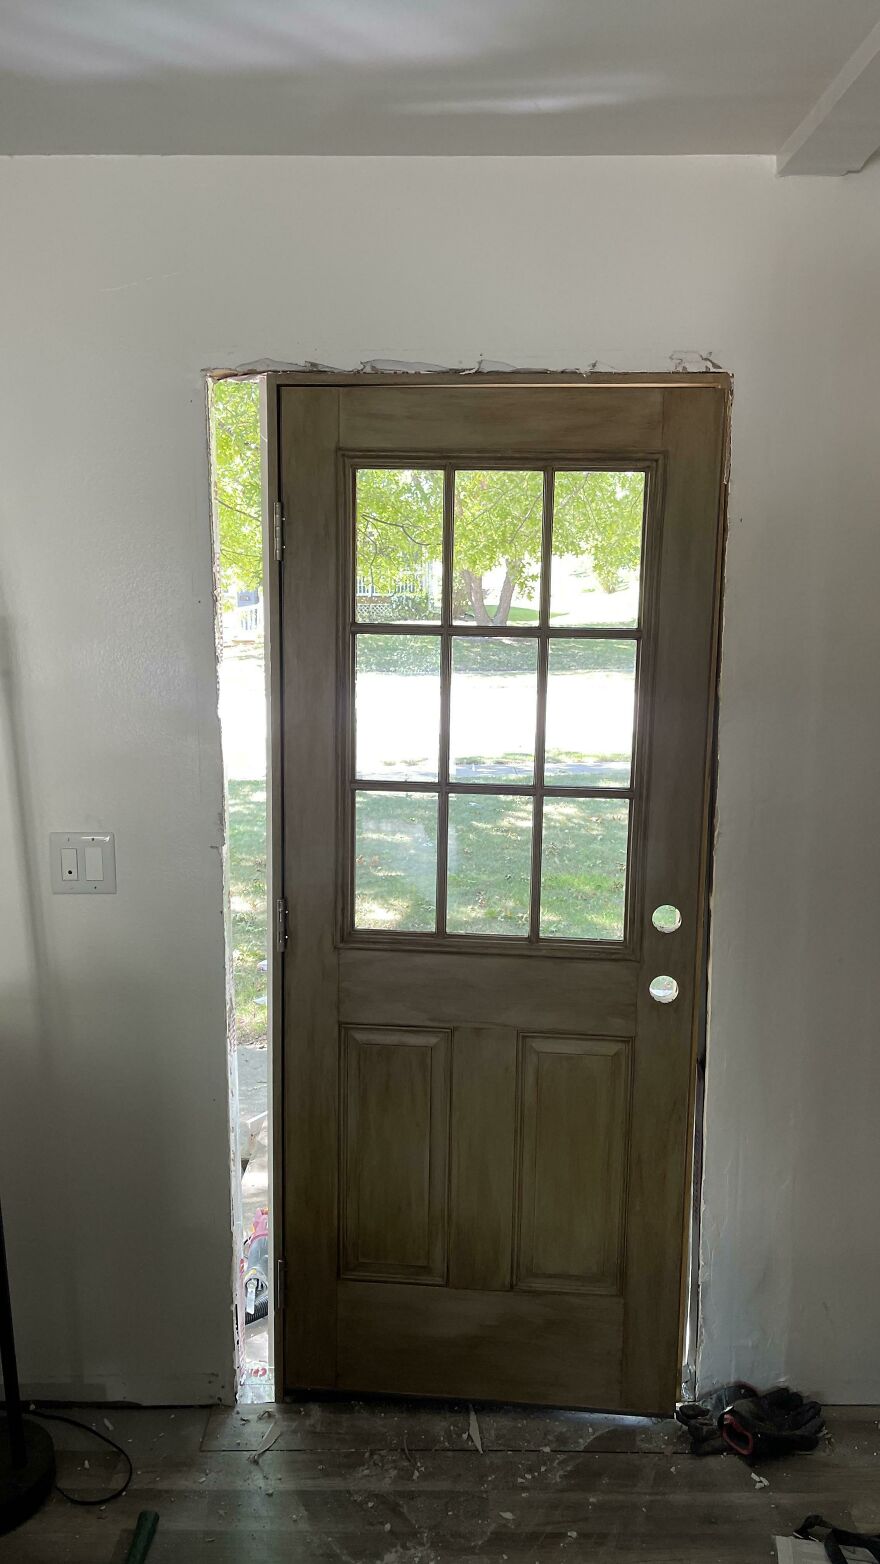 After Ripping Out My Front Door, I Learn There Are Different Sizes For Doors